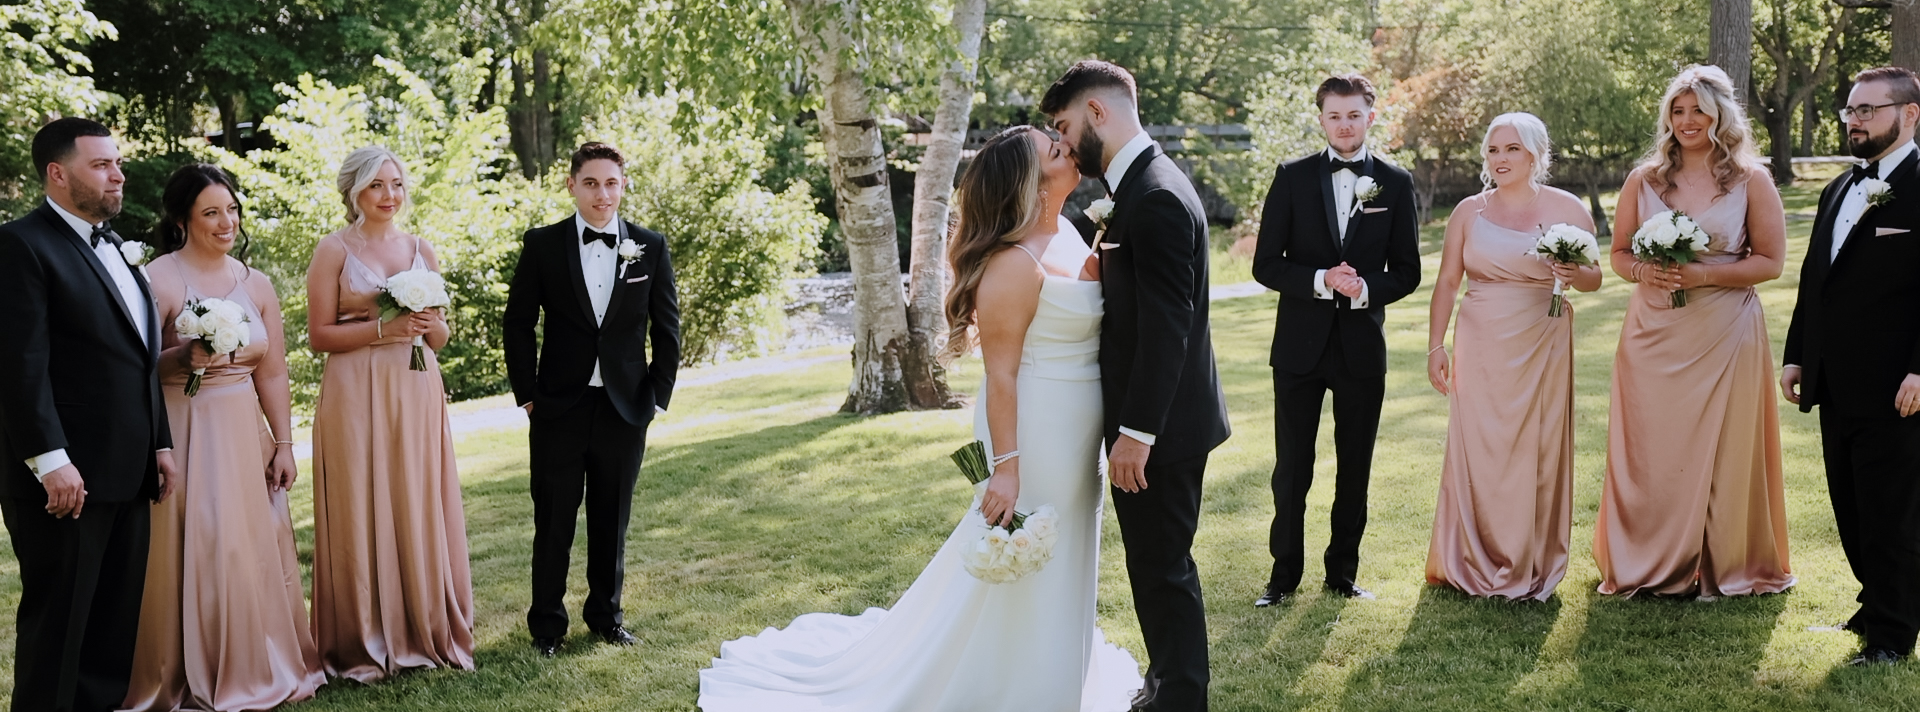 Couple kissing each other while their wedding party standing on either side of them. Bridesmaids are wearing pink satin dresses and groomsmen are wearing black tuxedos. Bride is wearing a simple but elegant wedding dress. The train of her dress is spread out over the grass. Her white bouquet with long green stems are in her right hand hanging at her side